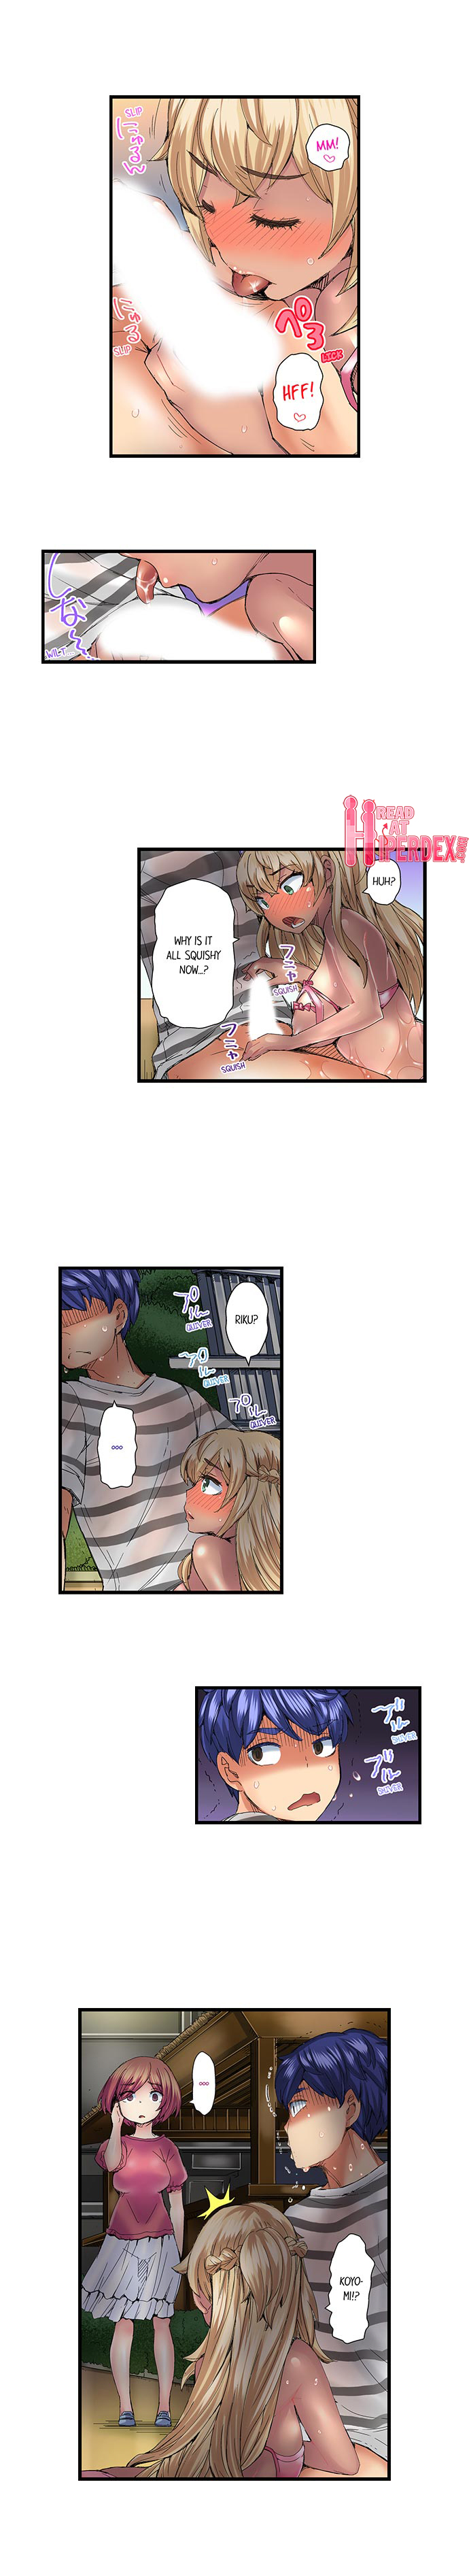 Taking a Hot Tanned Chick’s Virginity - Chapter 31 Page 2